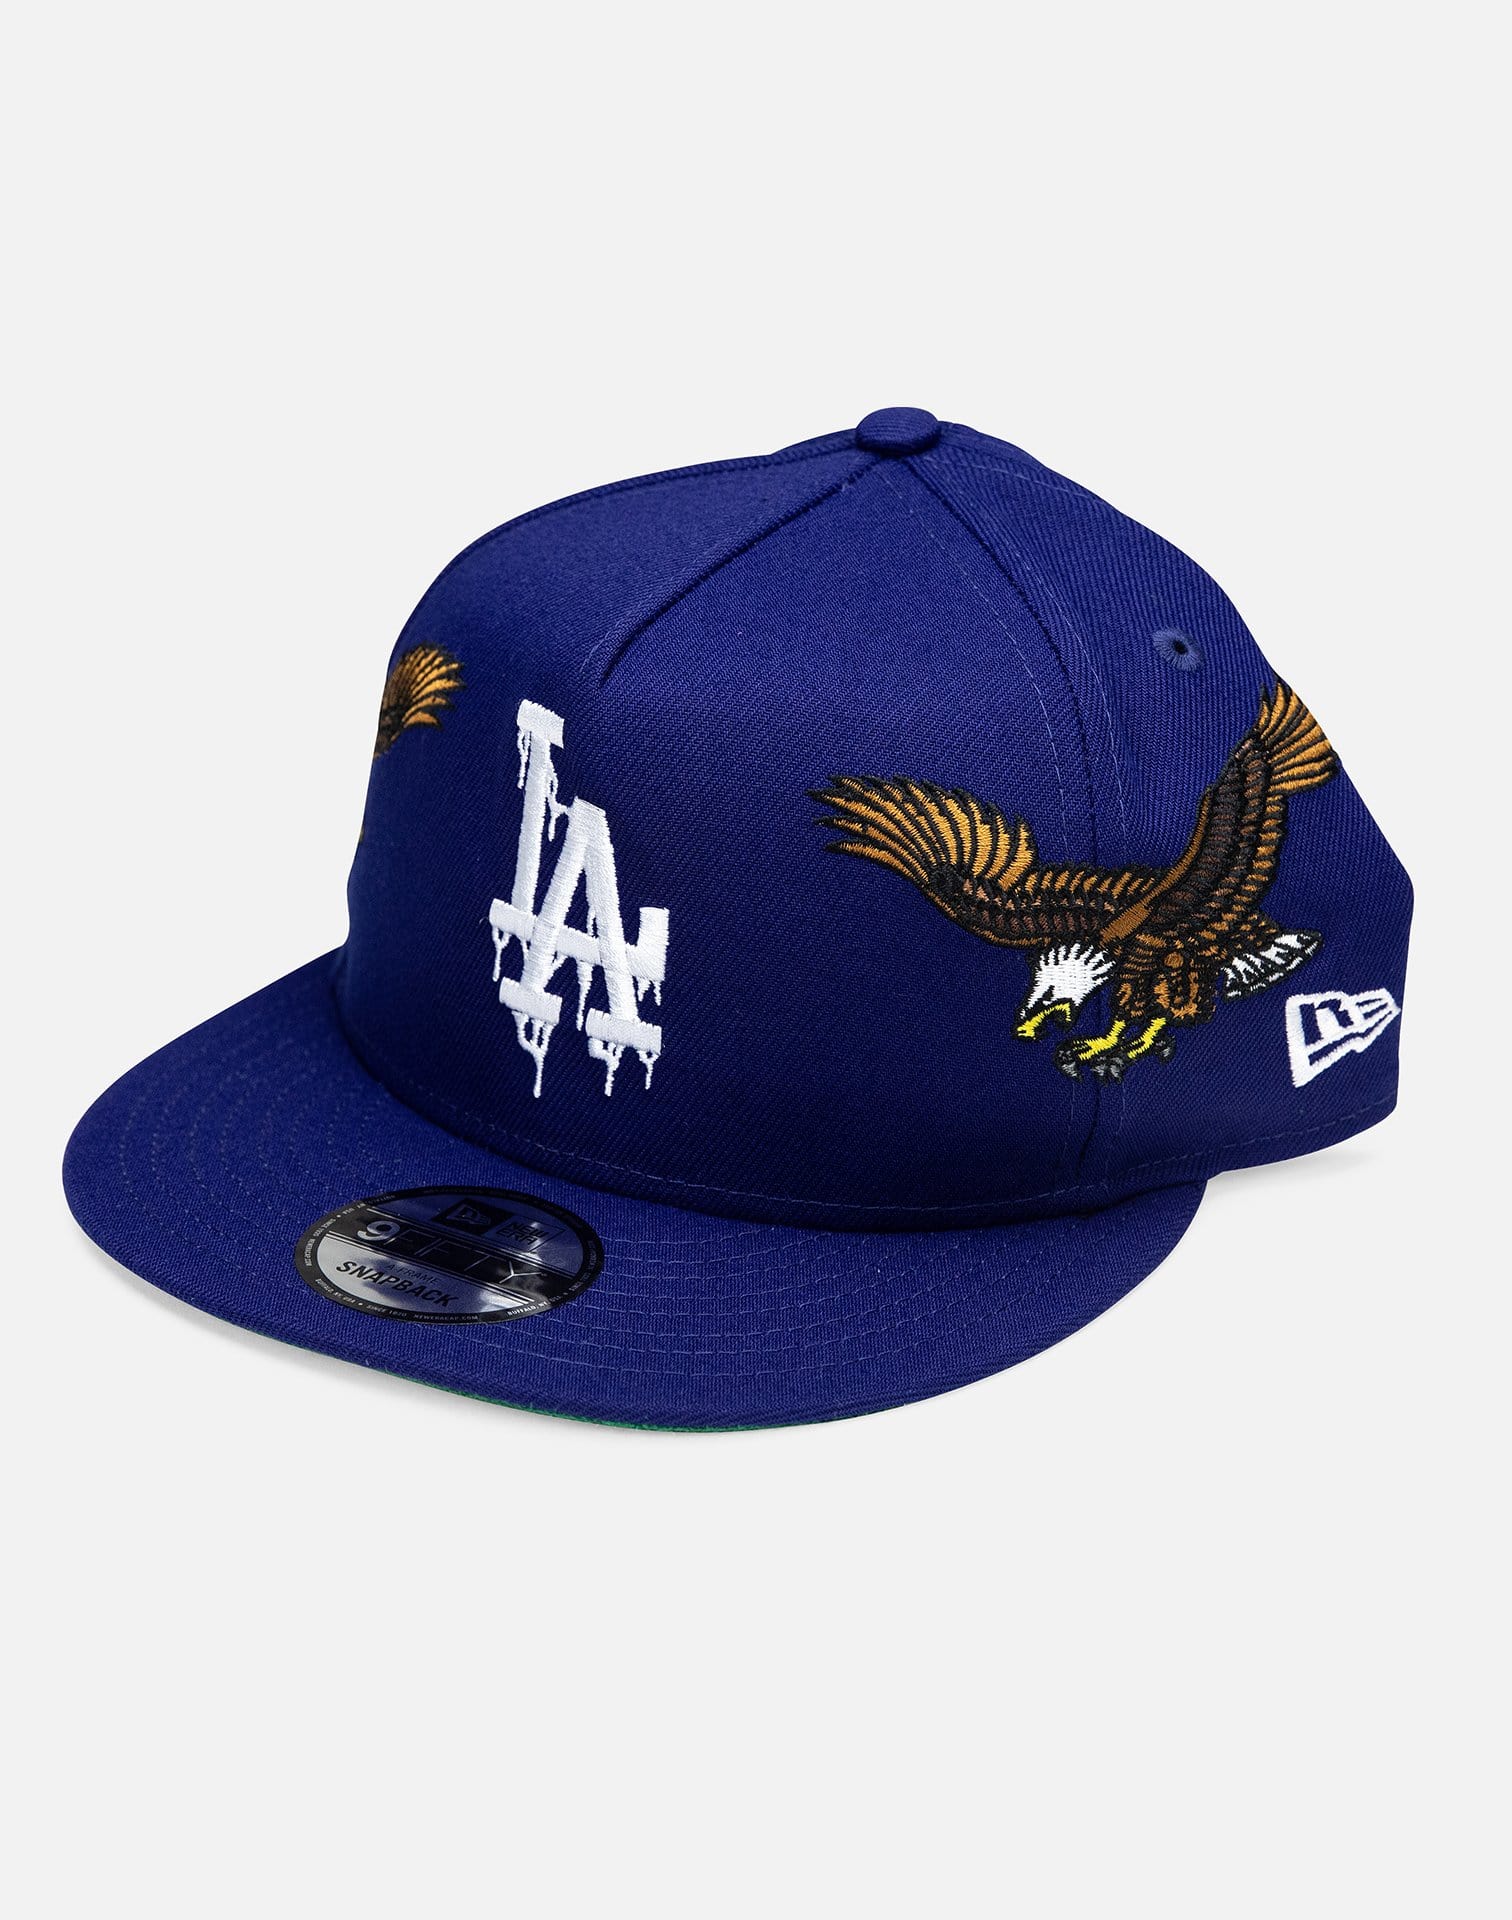 New Era, Accessories, Twntytwo Los Angeles Dodgers X Lakers Snapback